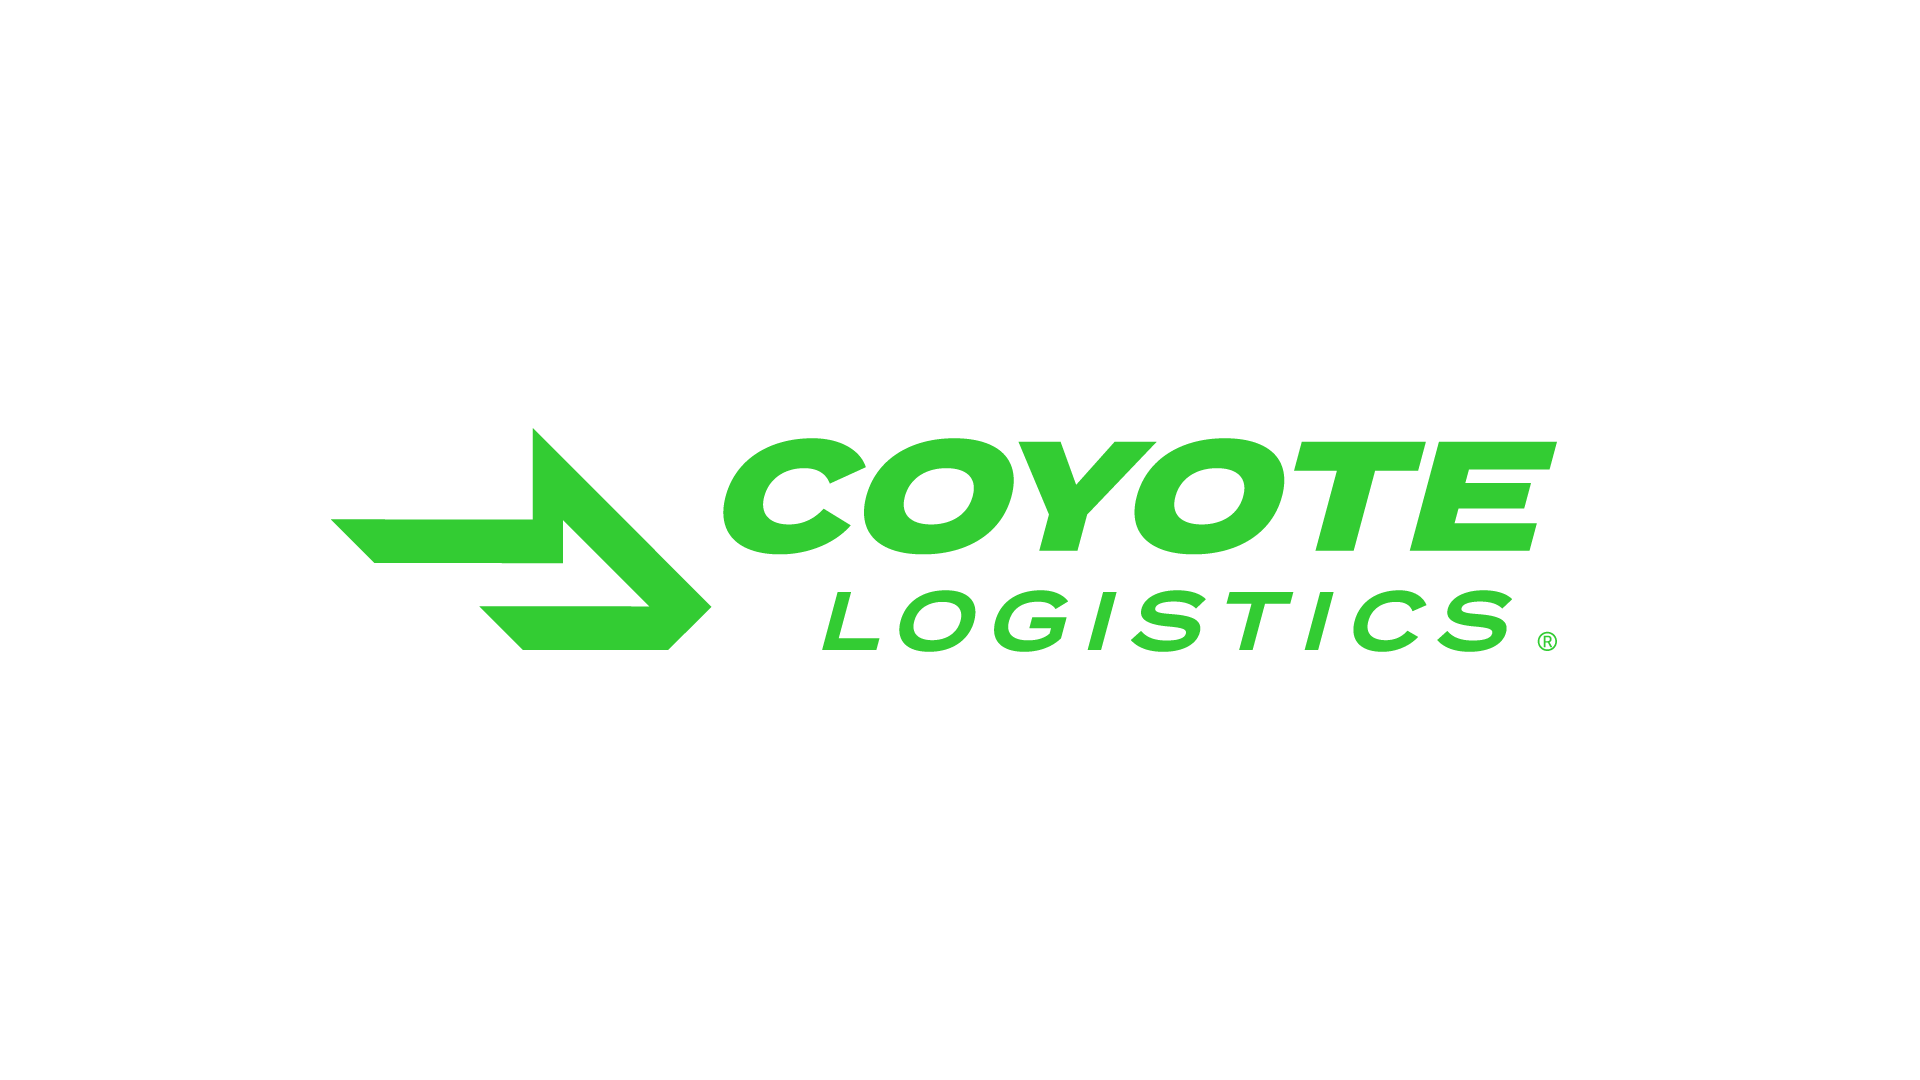 New_Coyote Logo HorizontalPrimary_Green_Rights.png (1)